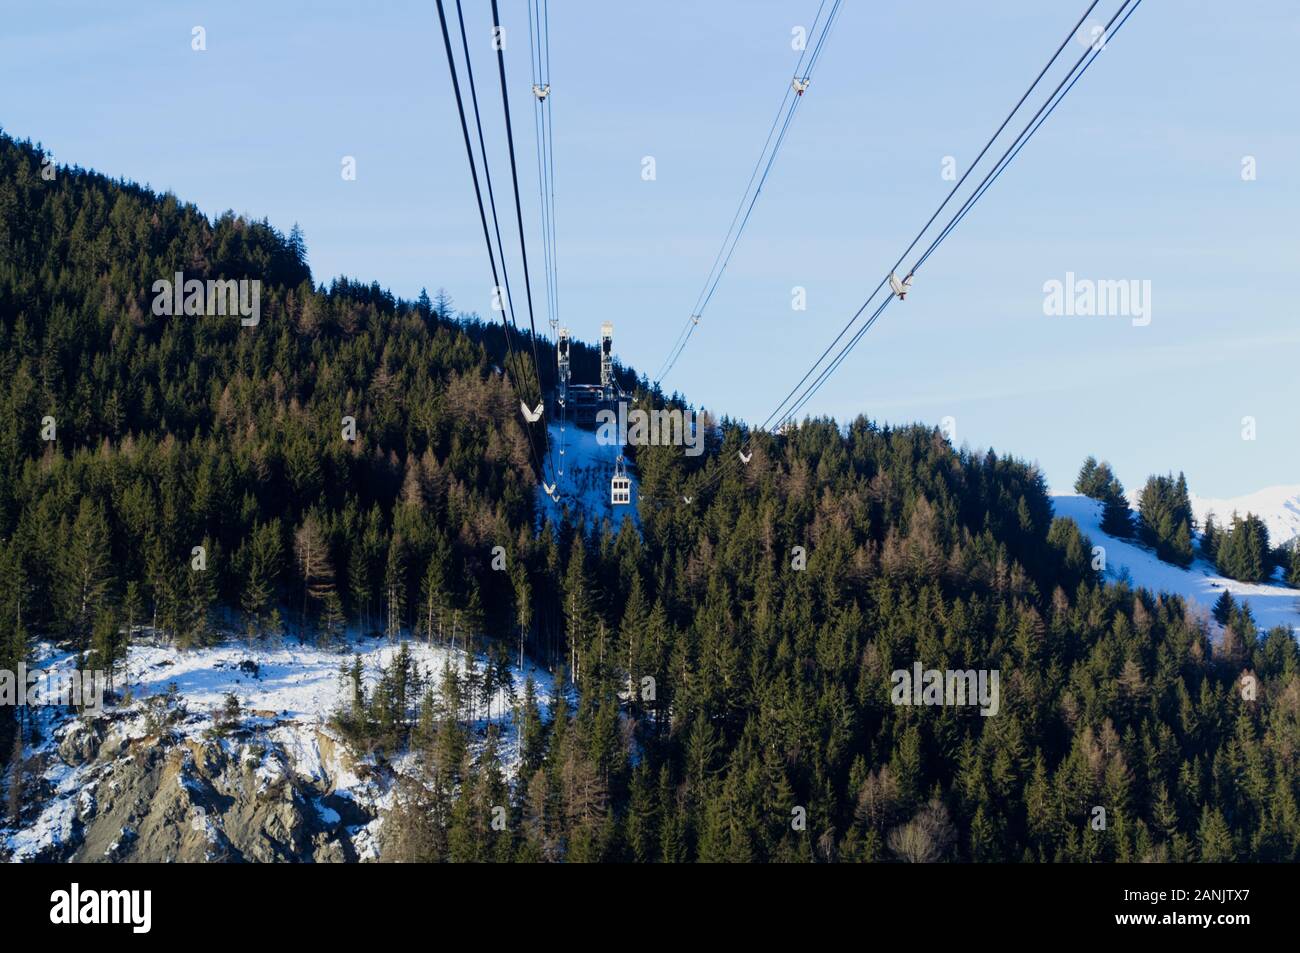 Cable car of the Vanoise Express travelling from La Plagne to Les Arcs (Peisey Vallandry) side at Les Arcs ski area, France. Stock Photo